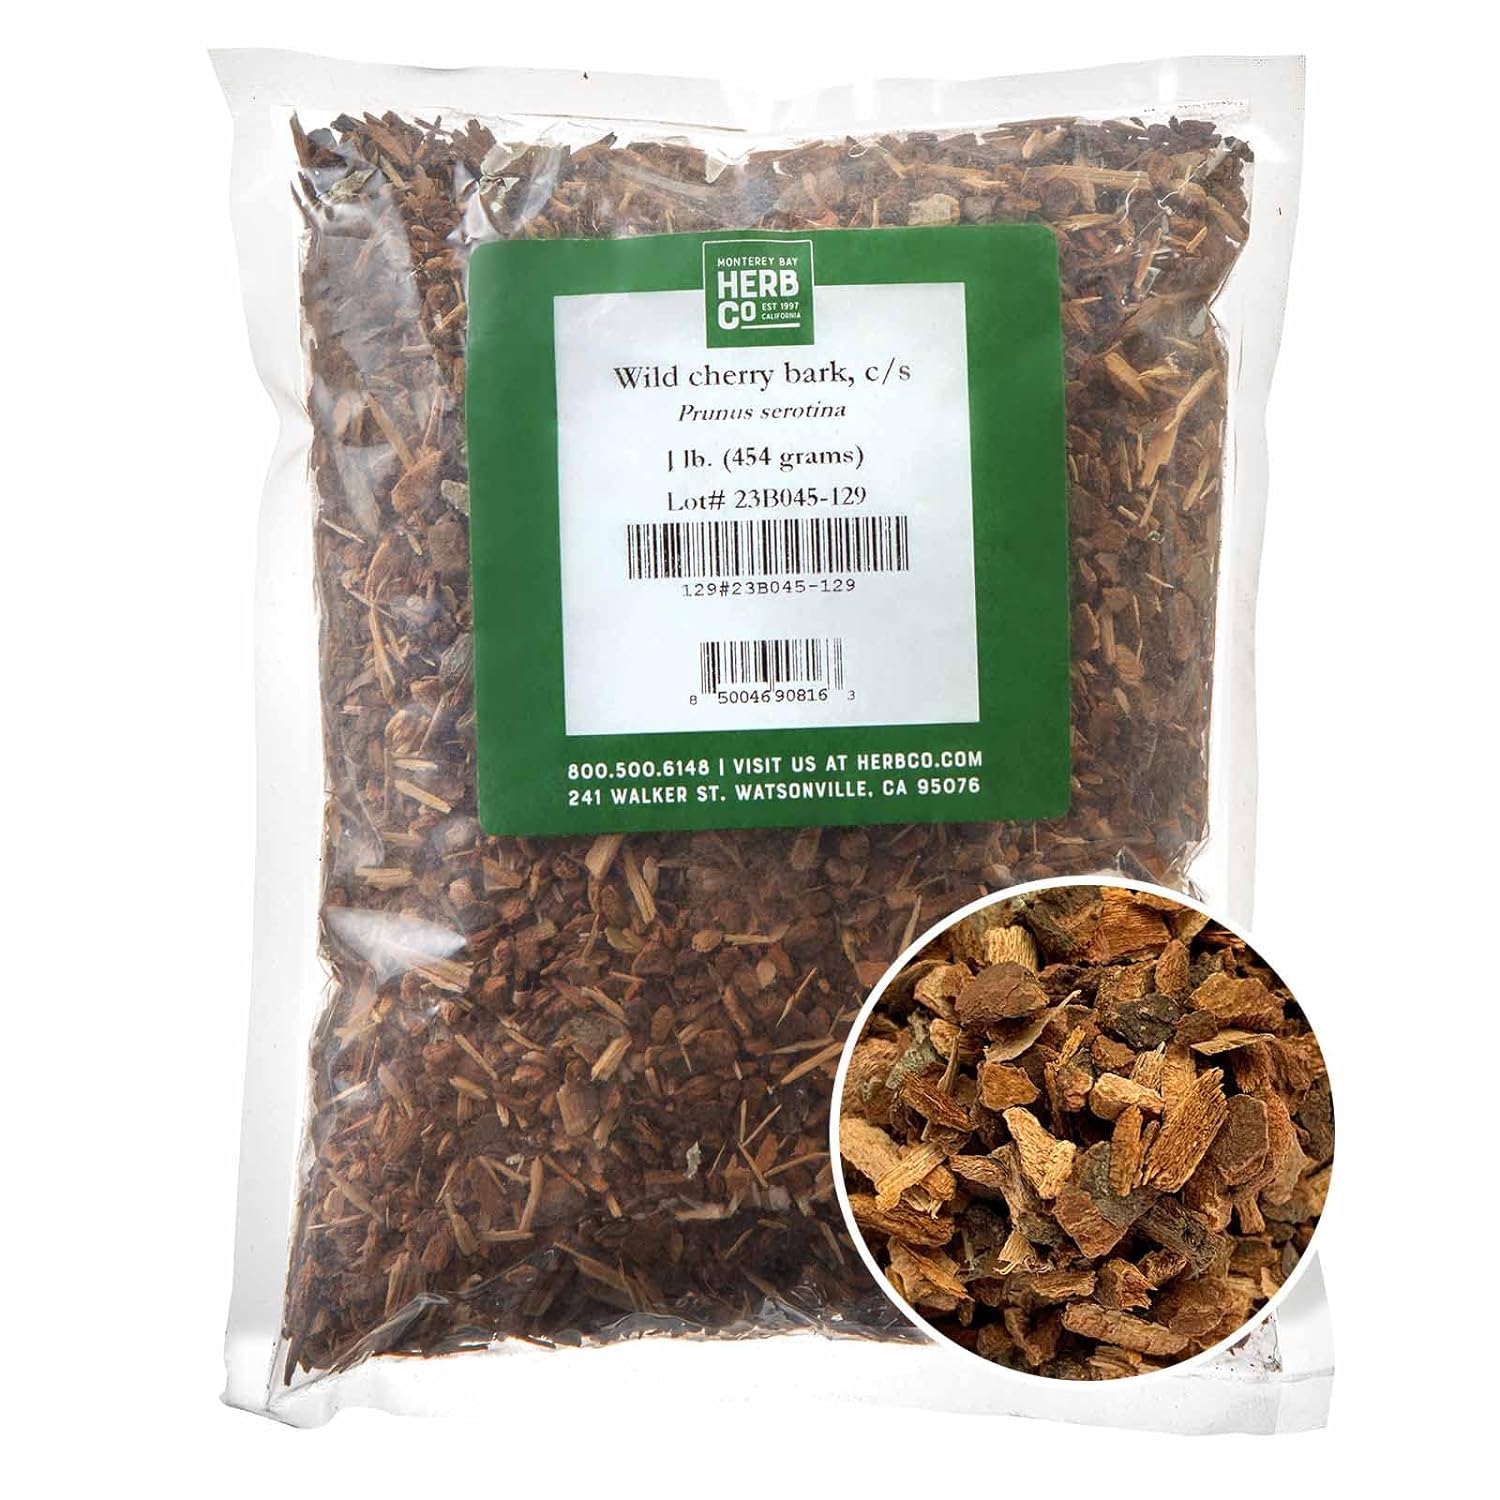 Best Pipe Tobacco: Enhance Your Smoking Experience with Premium Blends